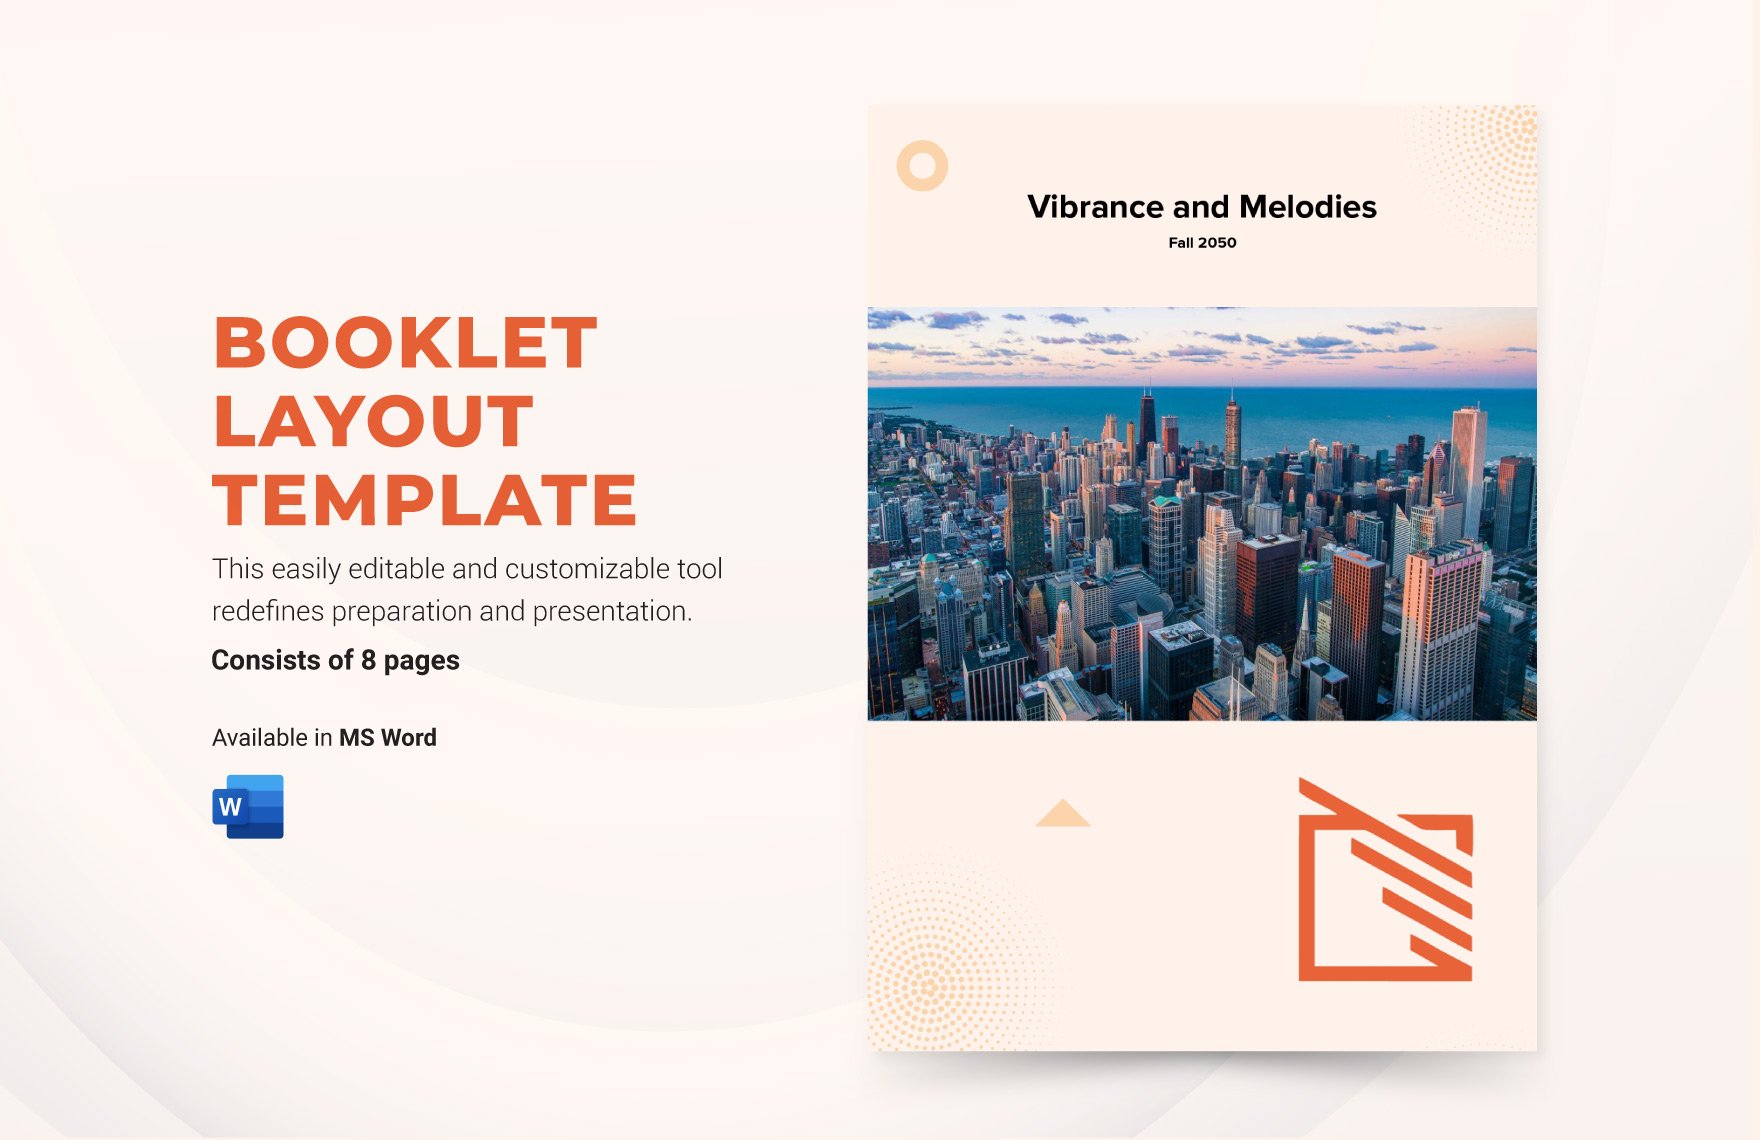 Booklet Layout Template